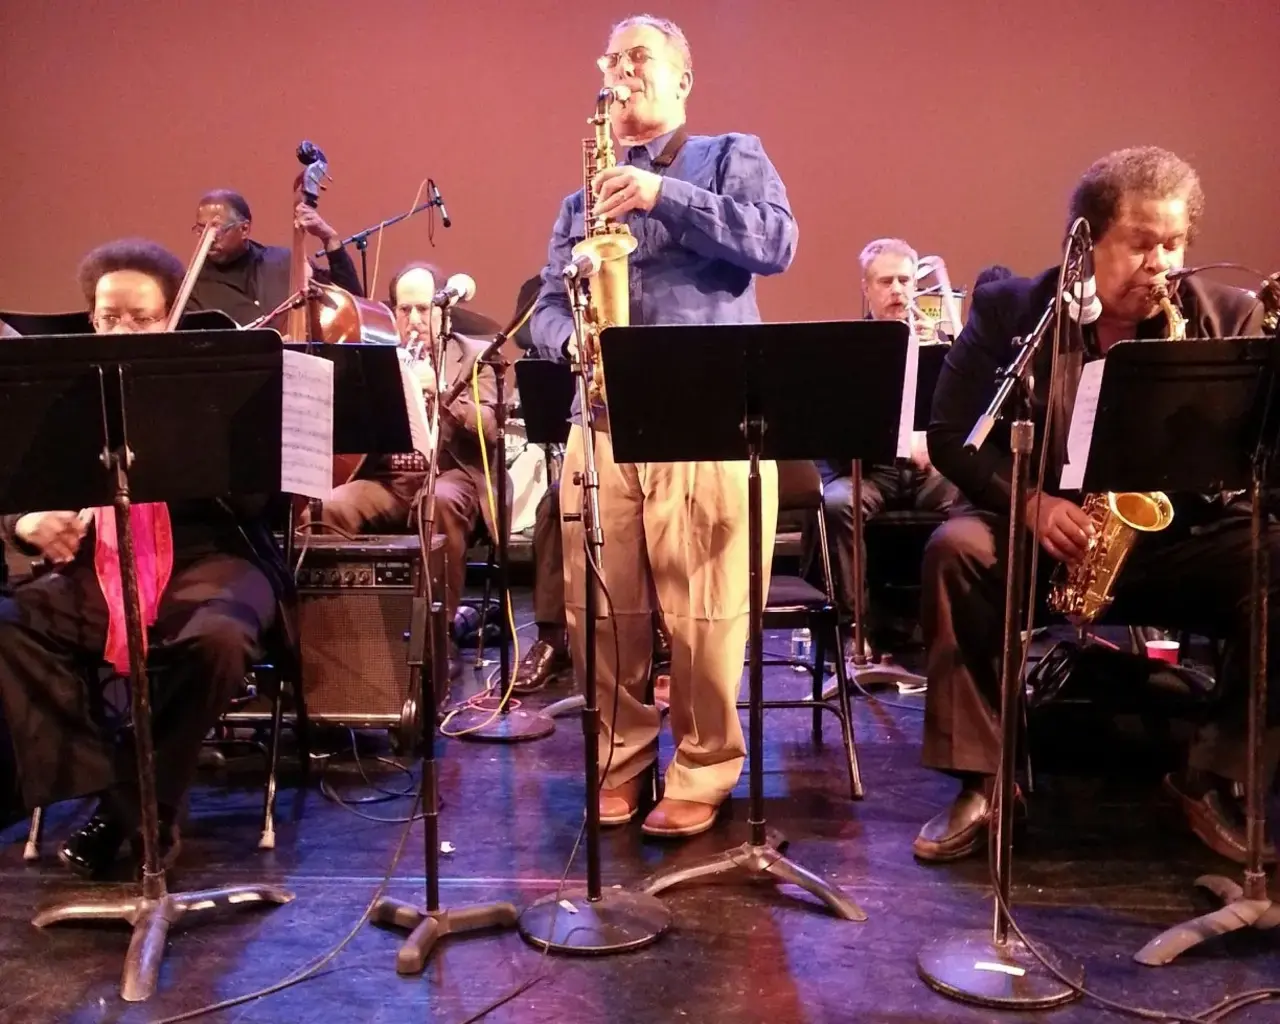 Bobby Zankel and the Warriors of the Wonderful Sound performing at the Painted Bride Art Center, 2014. Photo by Alvin K. Nurse.